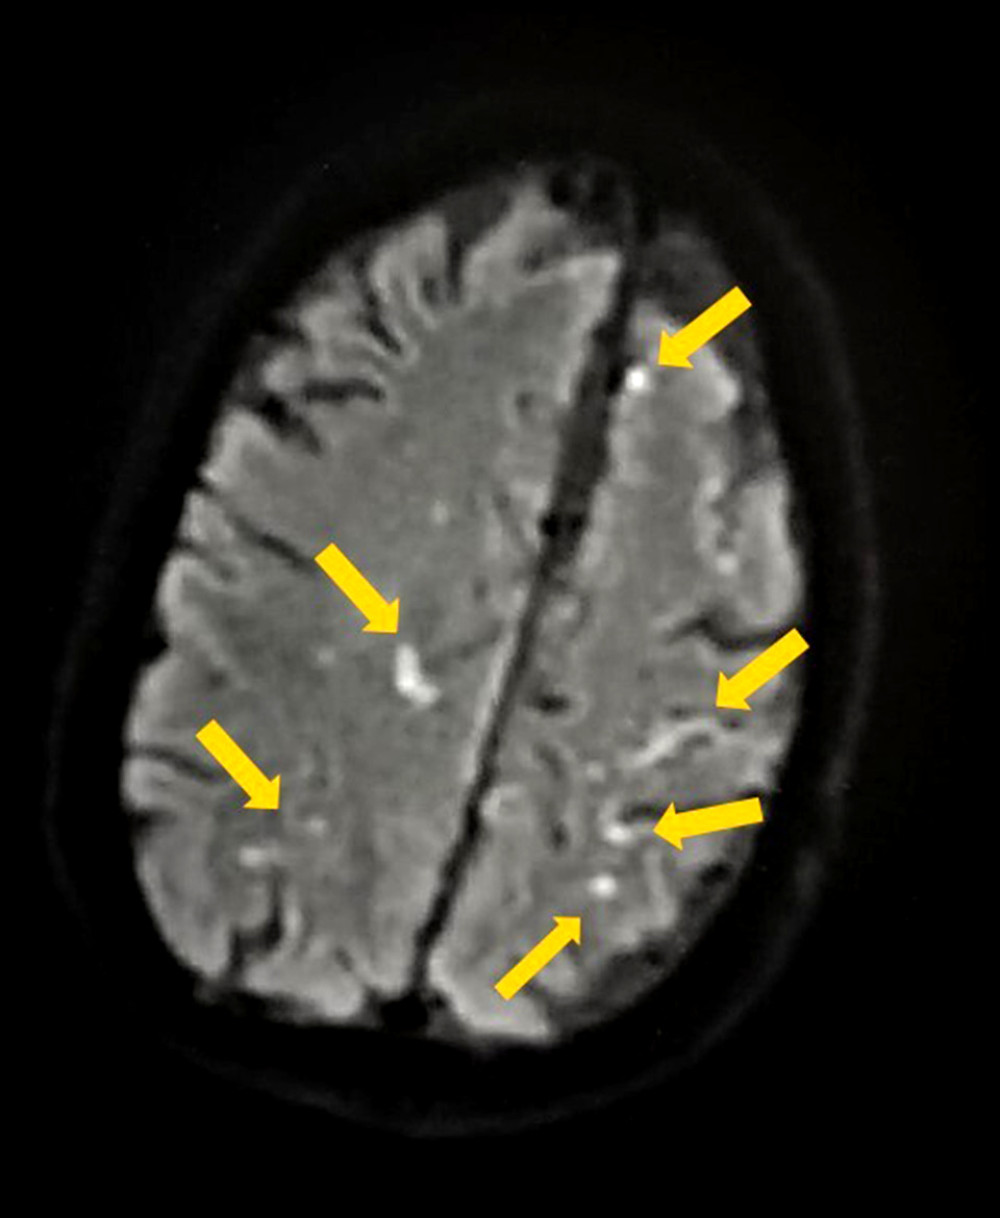 Magnetic resonance imaging on diffusion-weighted imaging showed multifocal bilateral punctate ischemic lesions in both anterior and posterior circulation.